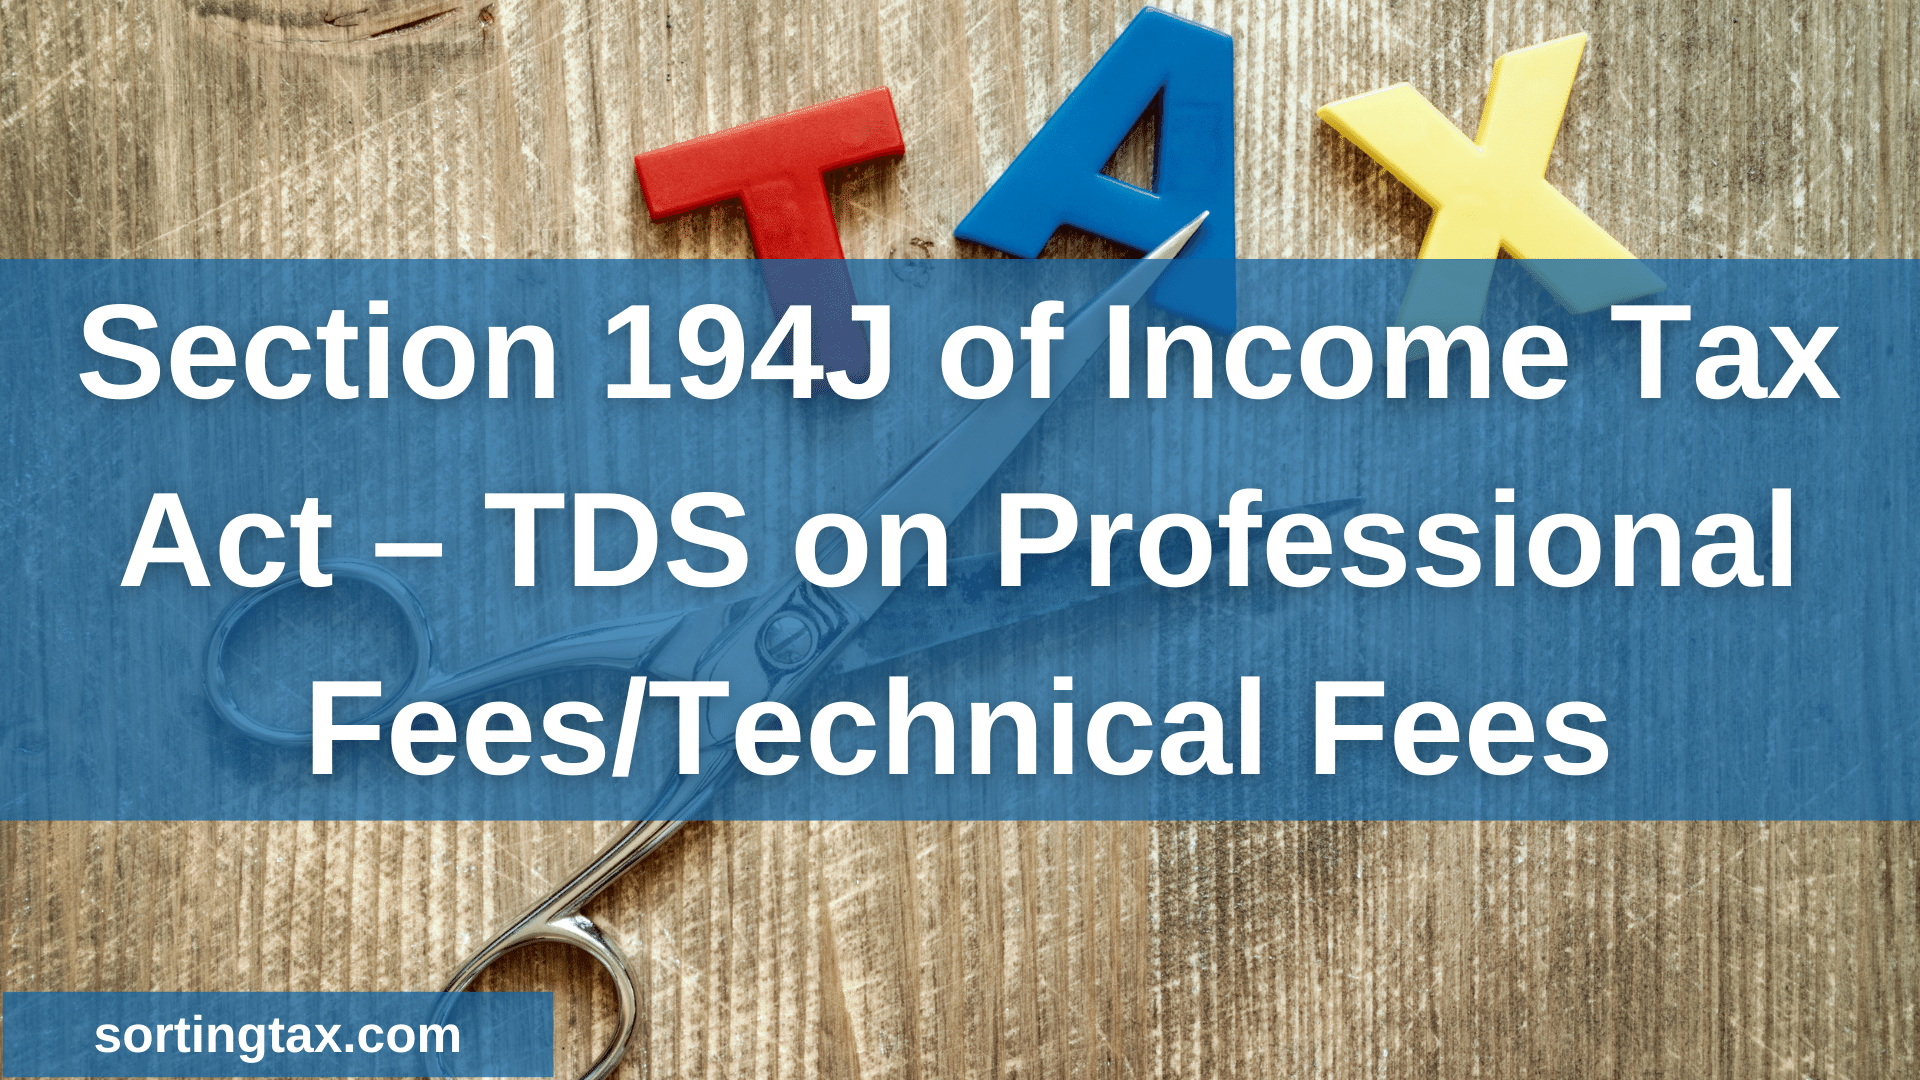 What Is The Tax Relief On Professional Fees